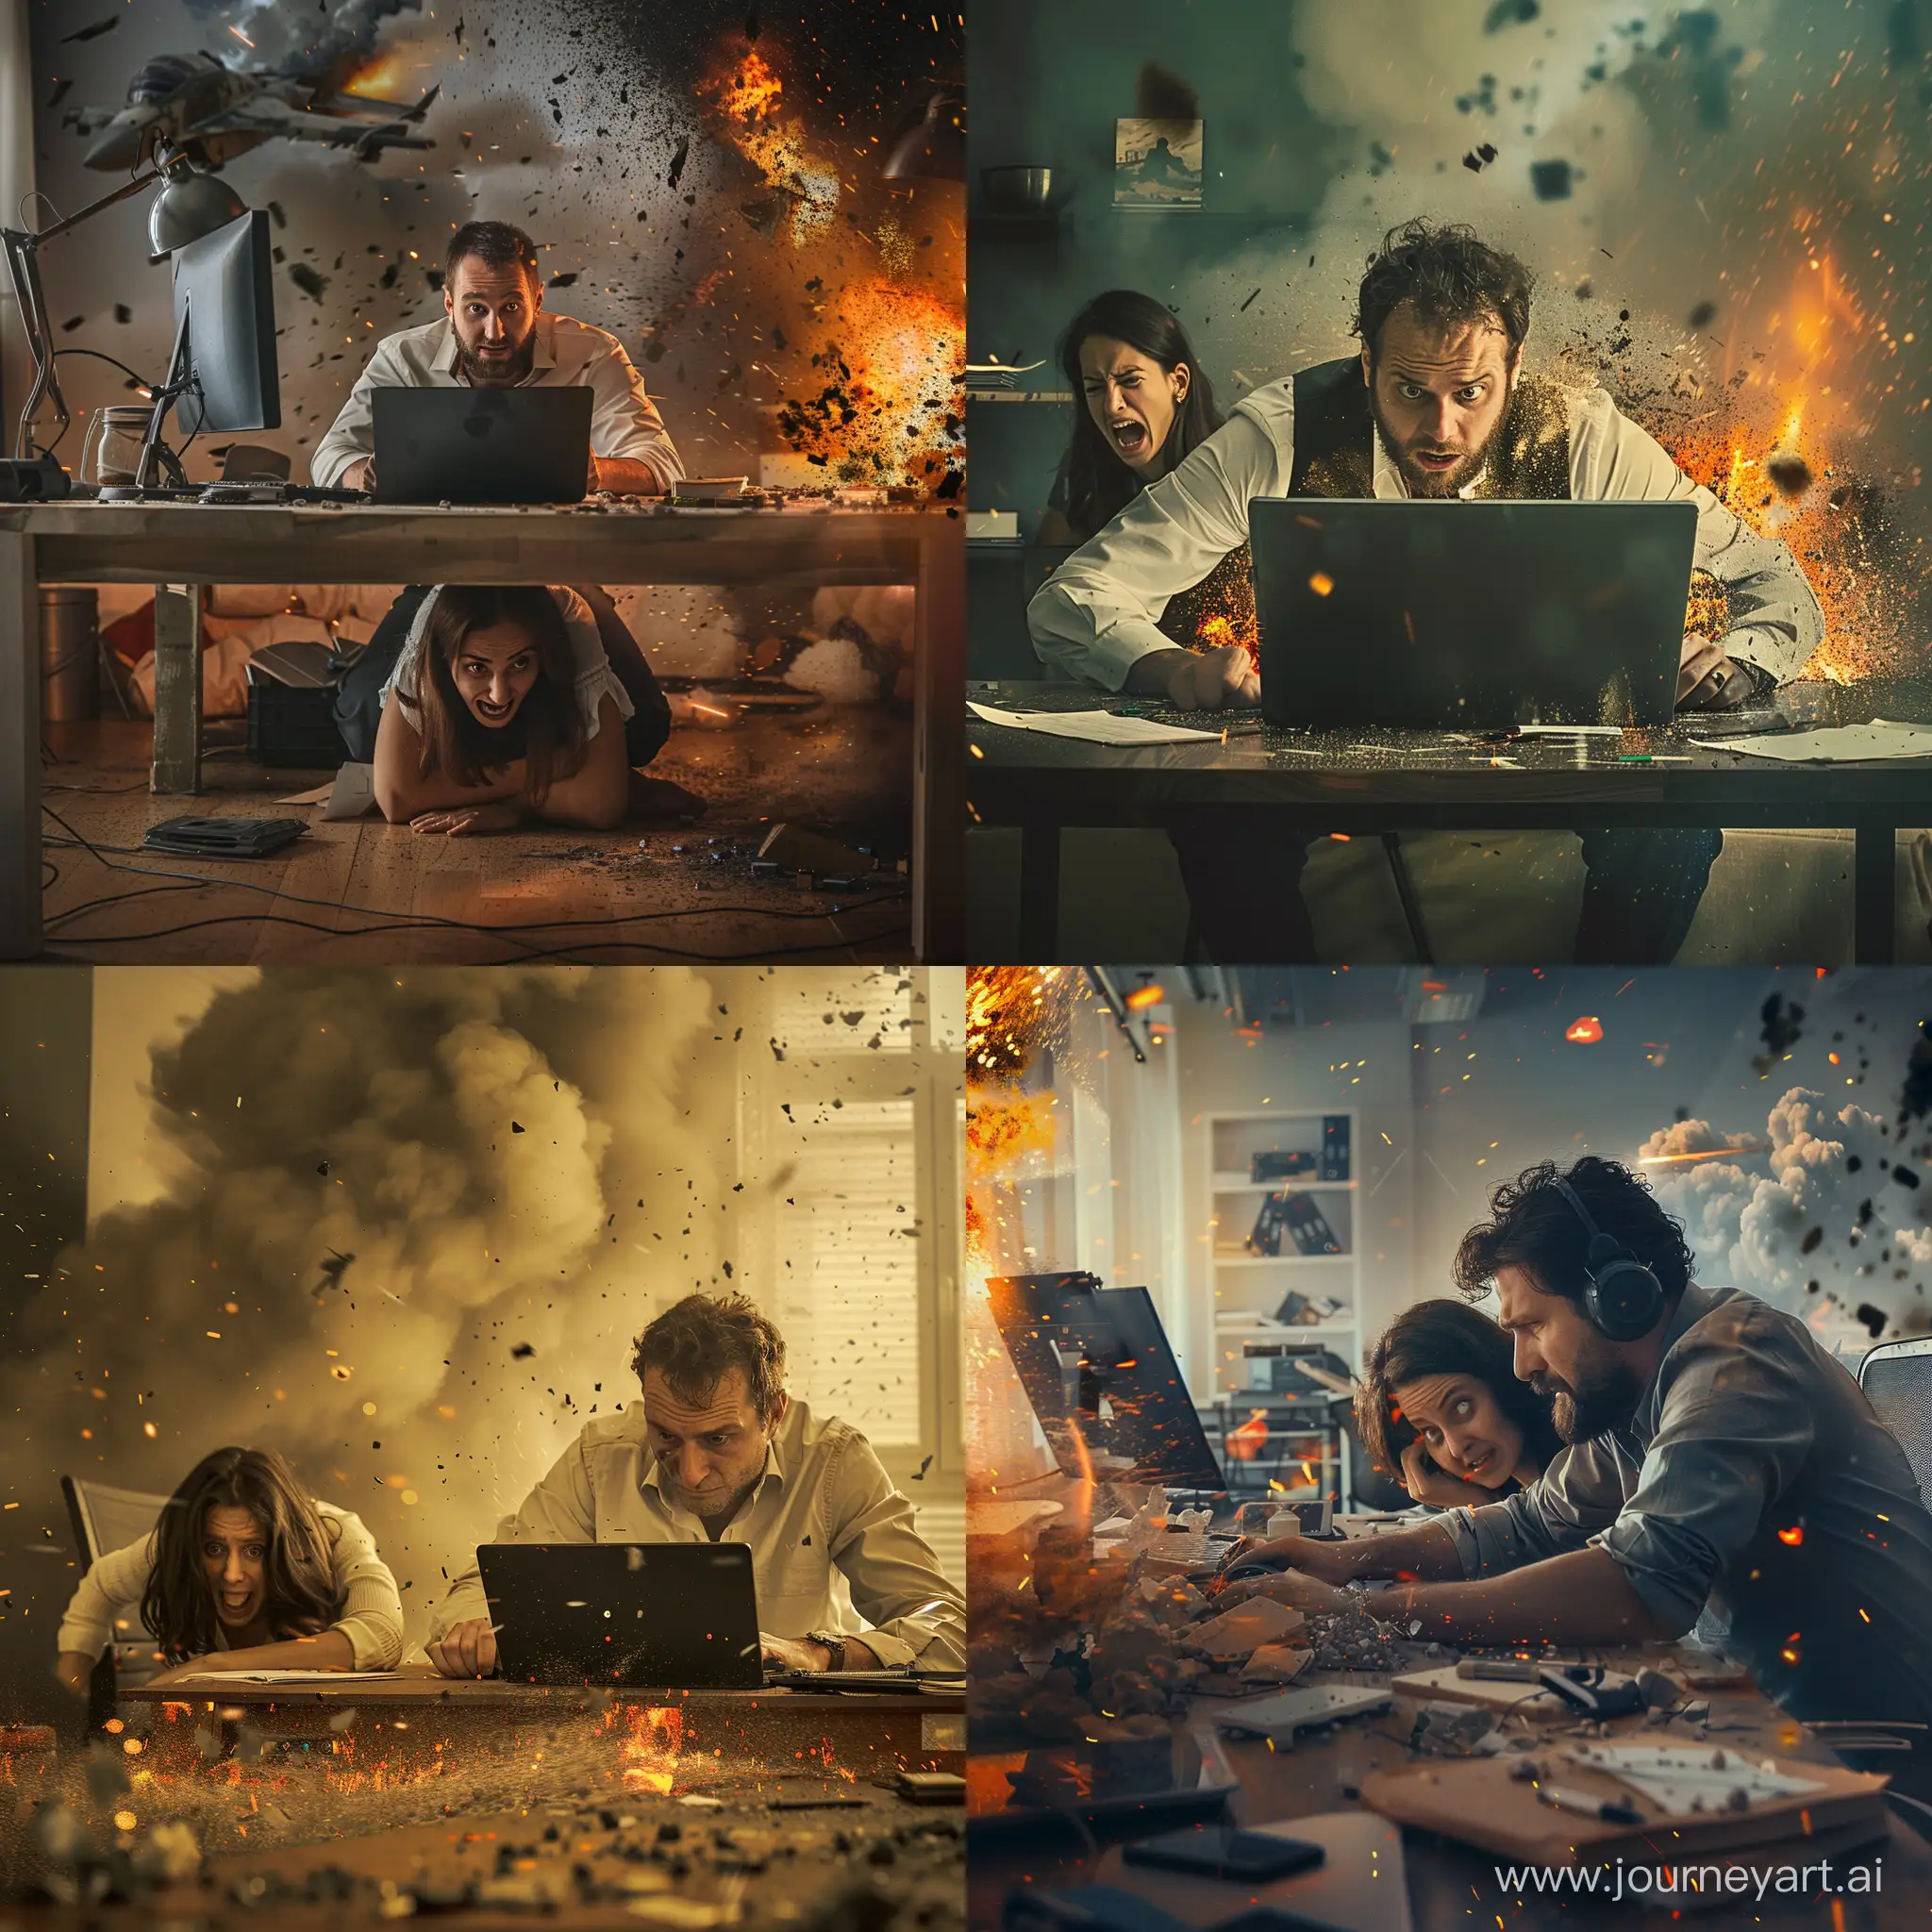 a software engineer working during an intense war battle, while his wife is cowering under the table in fear